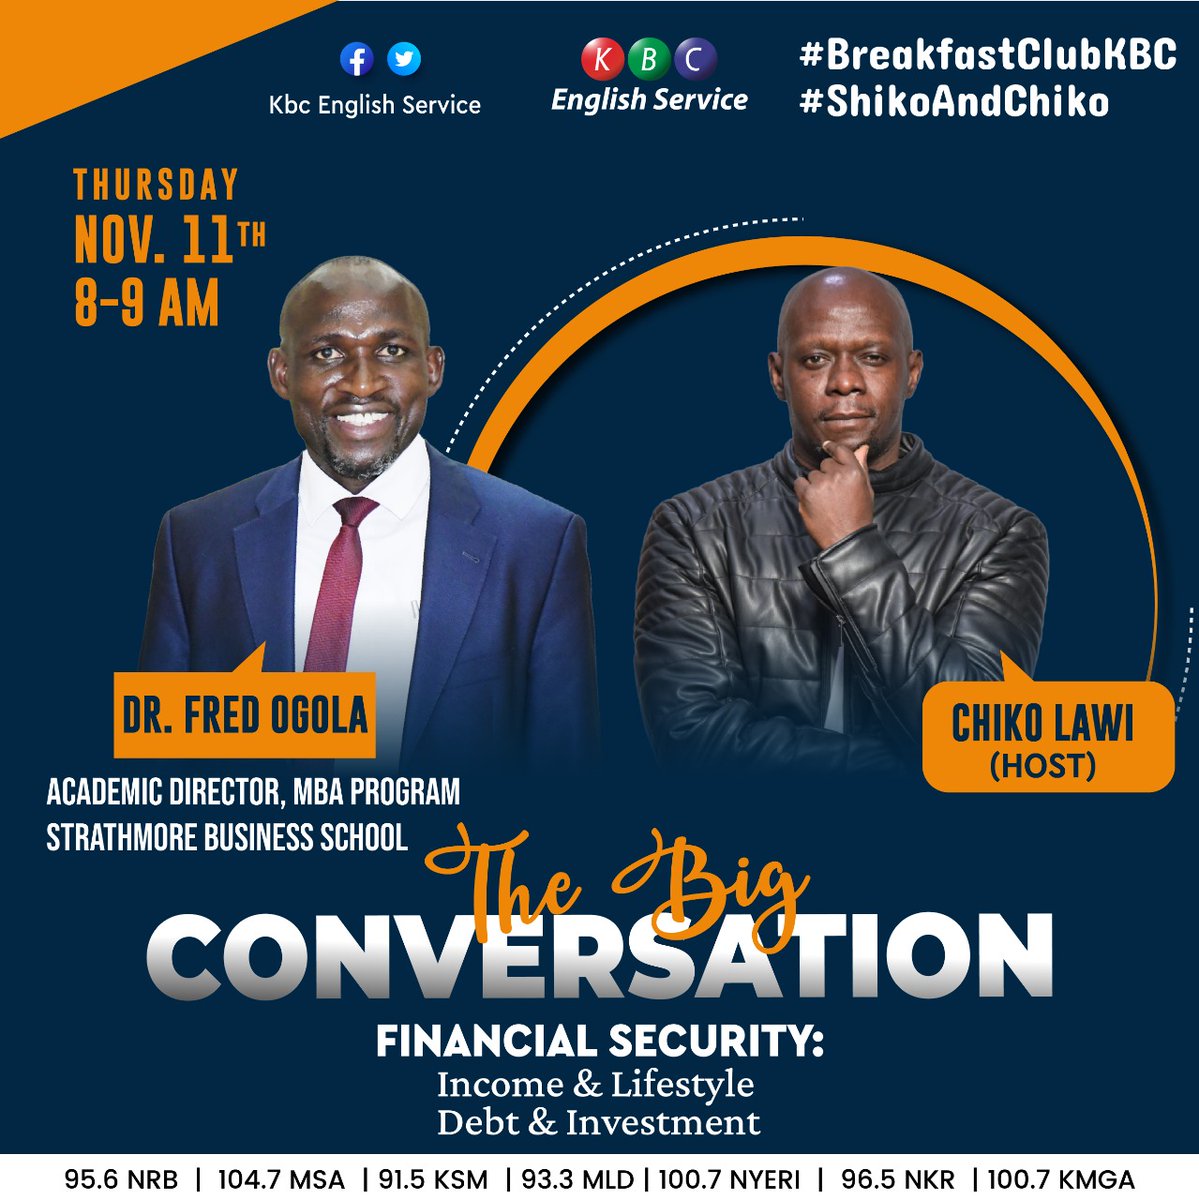 Balancing debt and investment is a tough task to most of us. Dr. Fred Ogola will share tips on how to navigate this challenge #ShikoAndChiko tomorrow morning on 
@kbcenglish… @ChikoLawi 👍👍👍